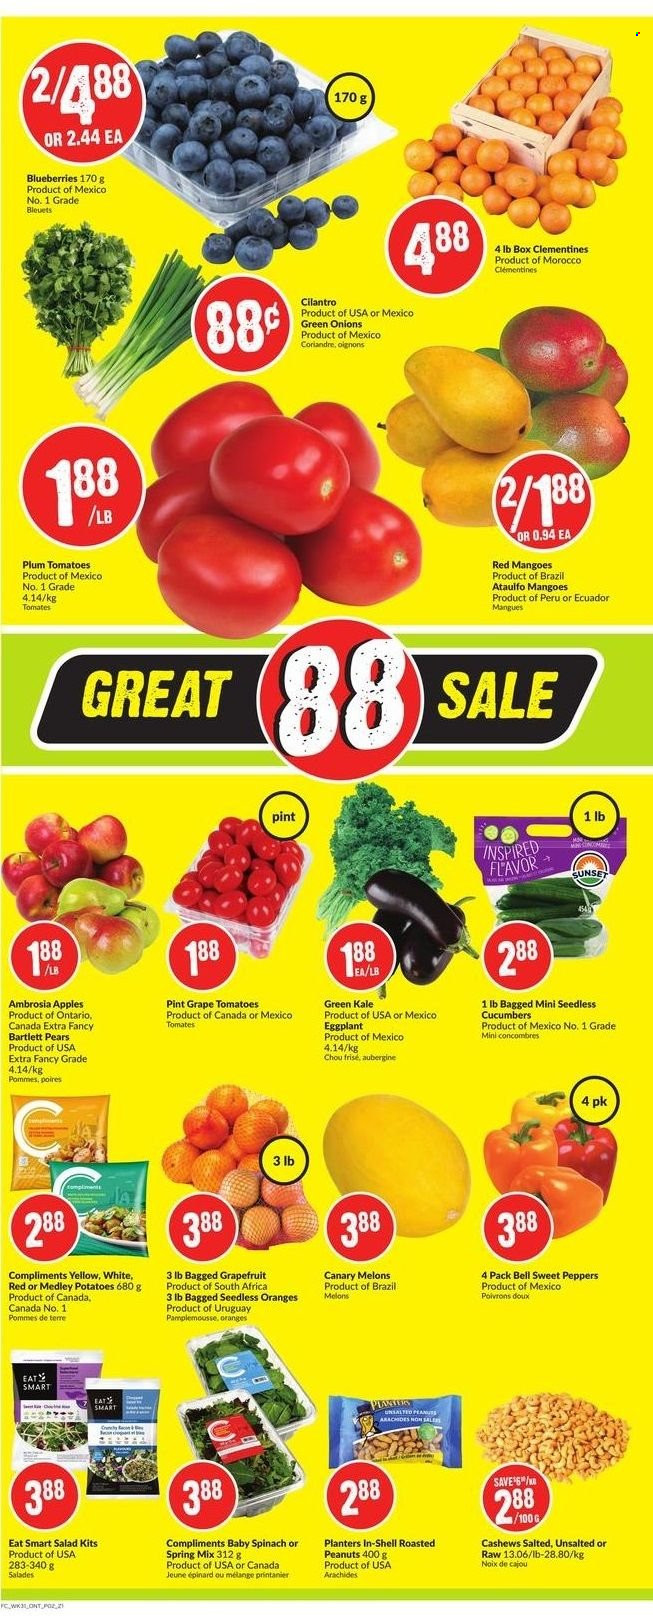 thumbnail - FreshCo. Flyer - November 25, 2021 - December 01, 2021 - Sales products - cucumber, sweet peppers, tomatoes, kale, potatoes, salad, peppers, eggplant, green onion, apples, Bartlett pears, clementines, grapefruits, mango, pears, melons, cilantro, cashews, roasted peanuts, peanuts, Planters, oranges. Page 2.